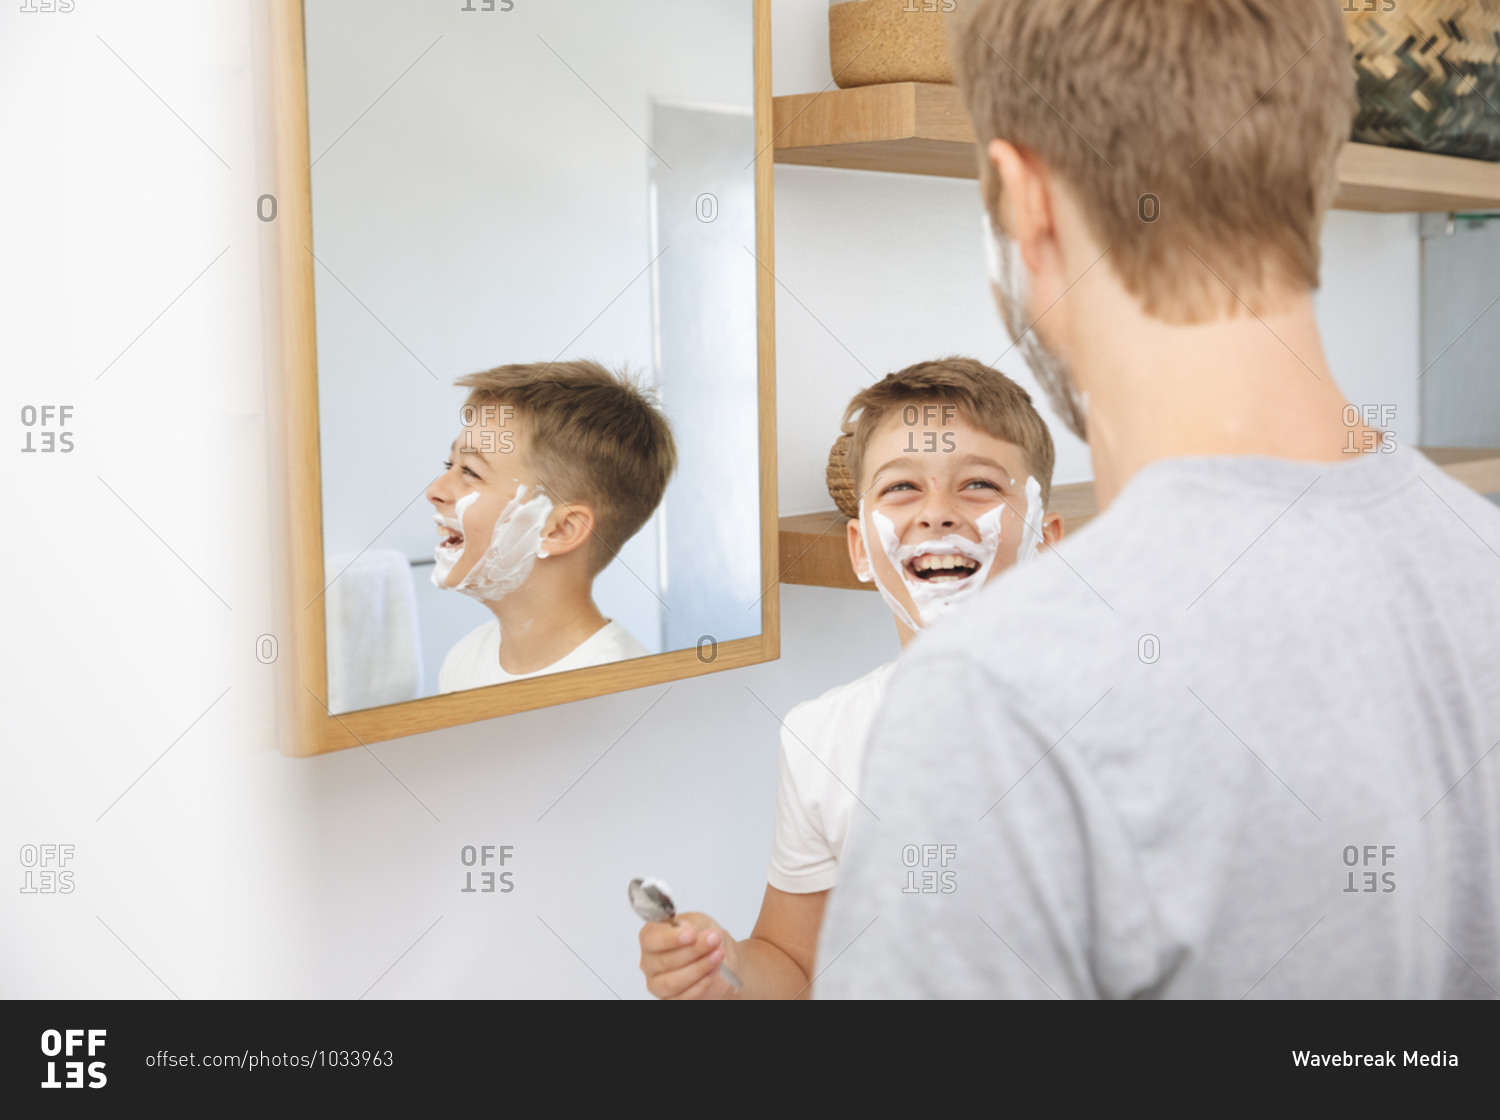 Caucasian man at home with his son together, in bathroom, shaving with shaving cream on faces, smiling. Social distancing during Covid 19 Coronavirus quarantine lockdown.